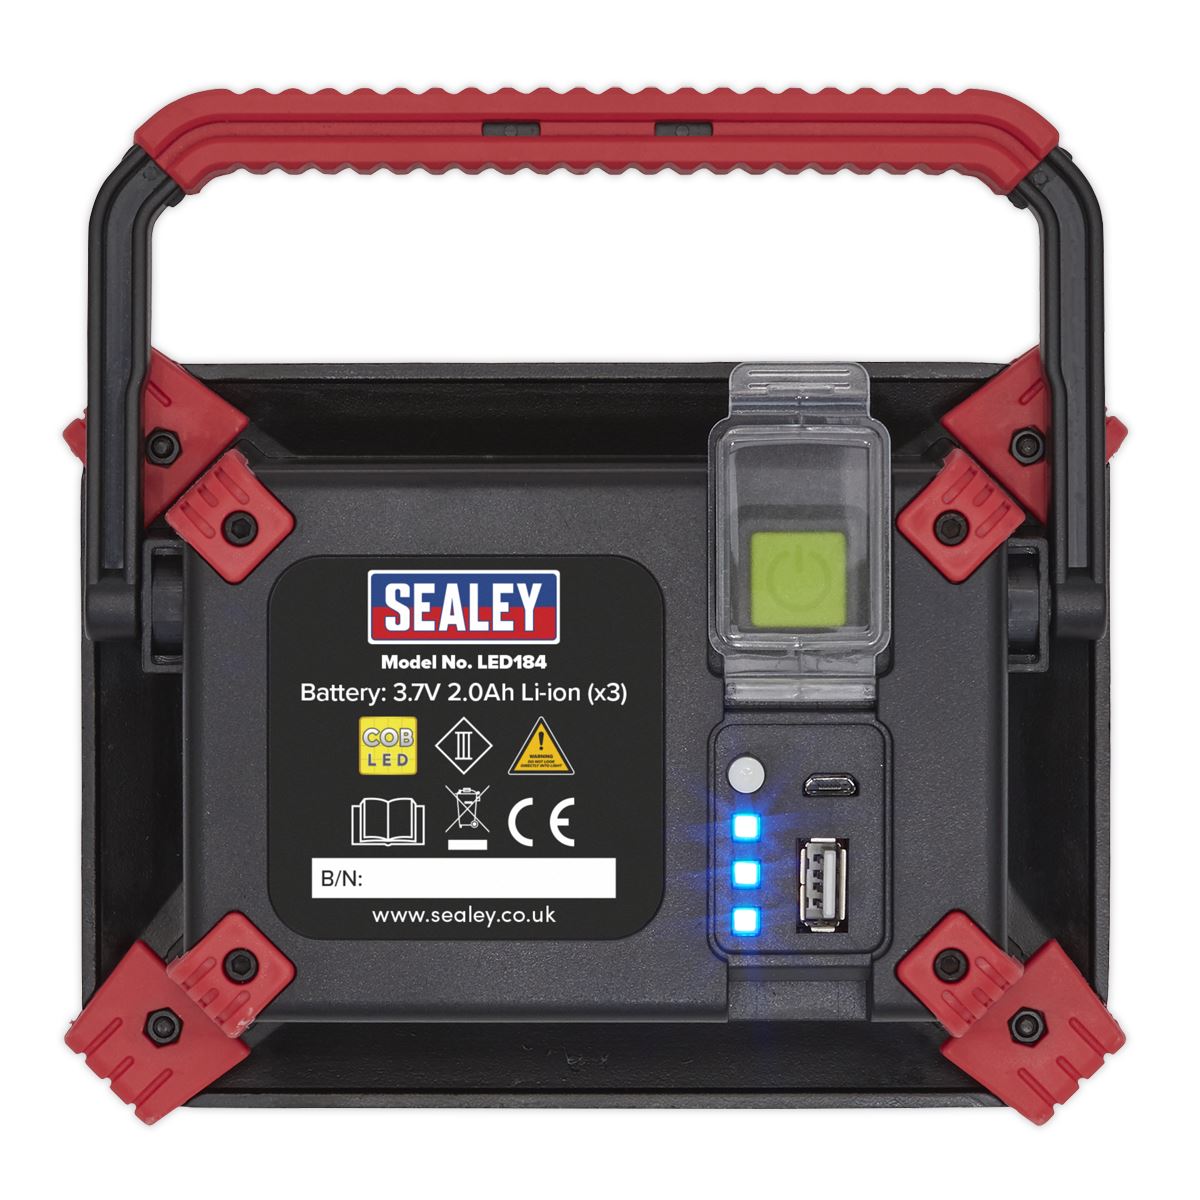 Sealey Rechargeable Portable Floodlight & Power Bank 20W COB LED